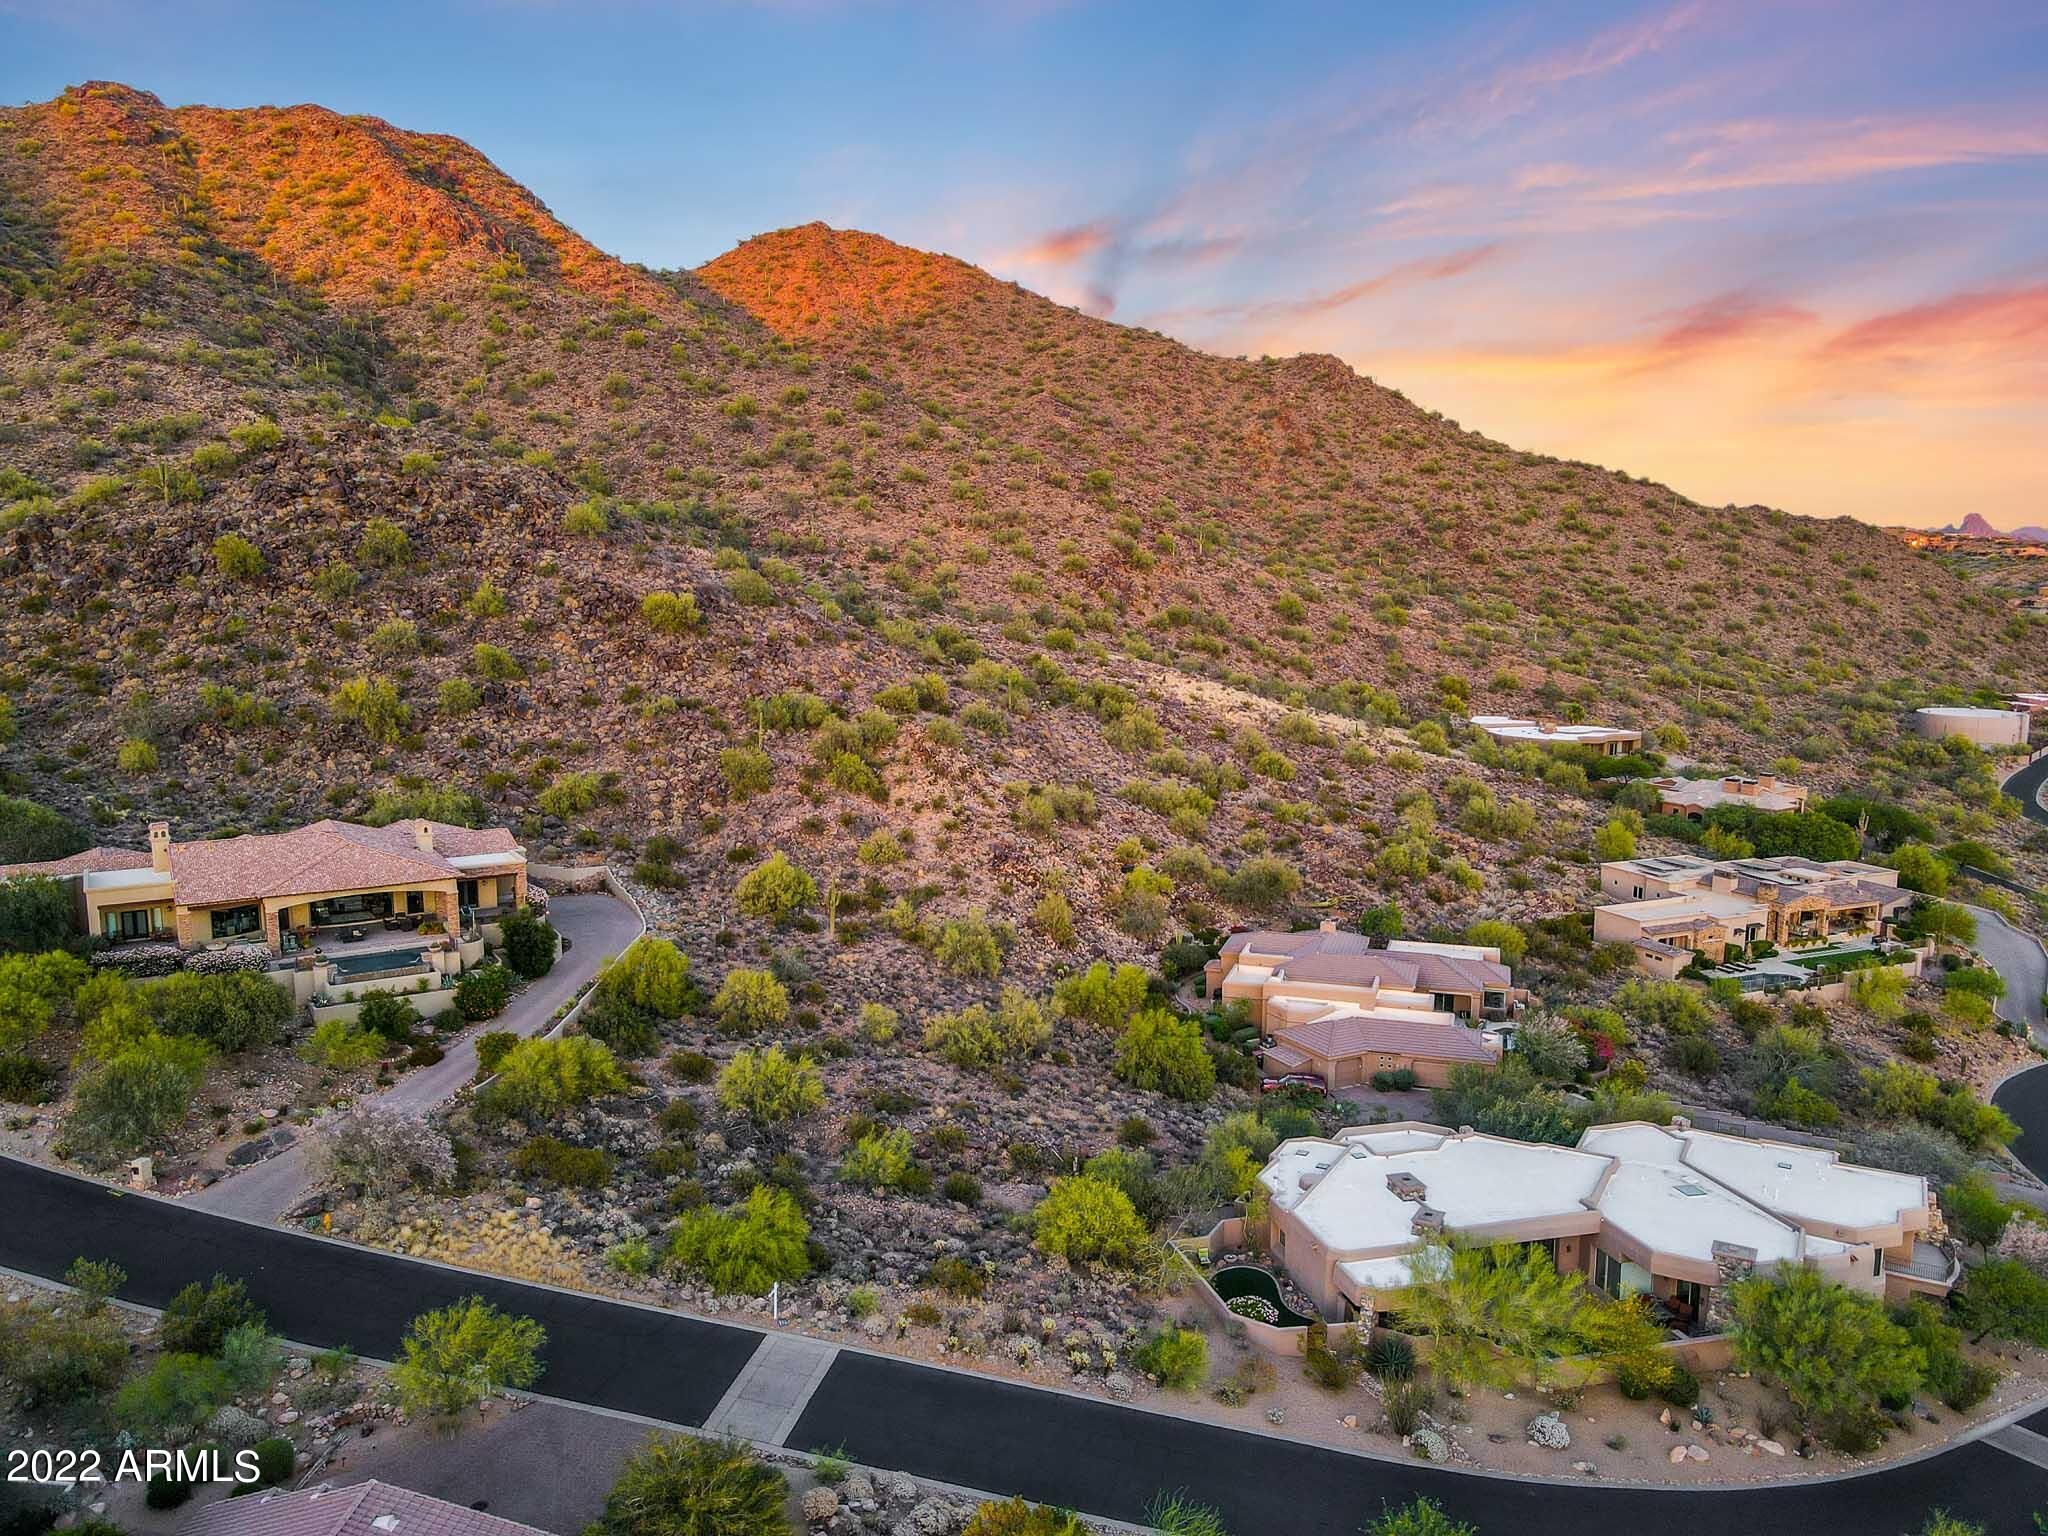 Scottsdale is THE place to be – 2.03 acre lot, ready for dream home build